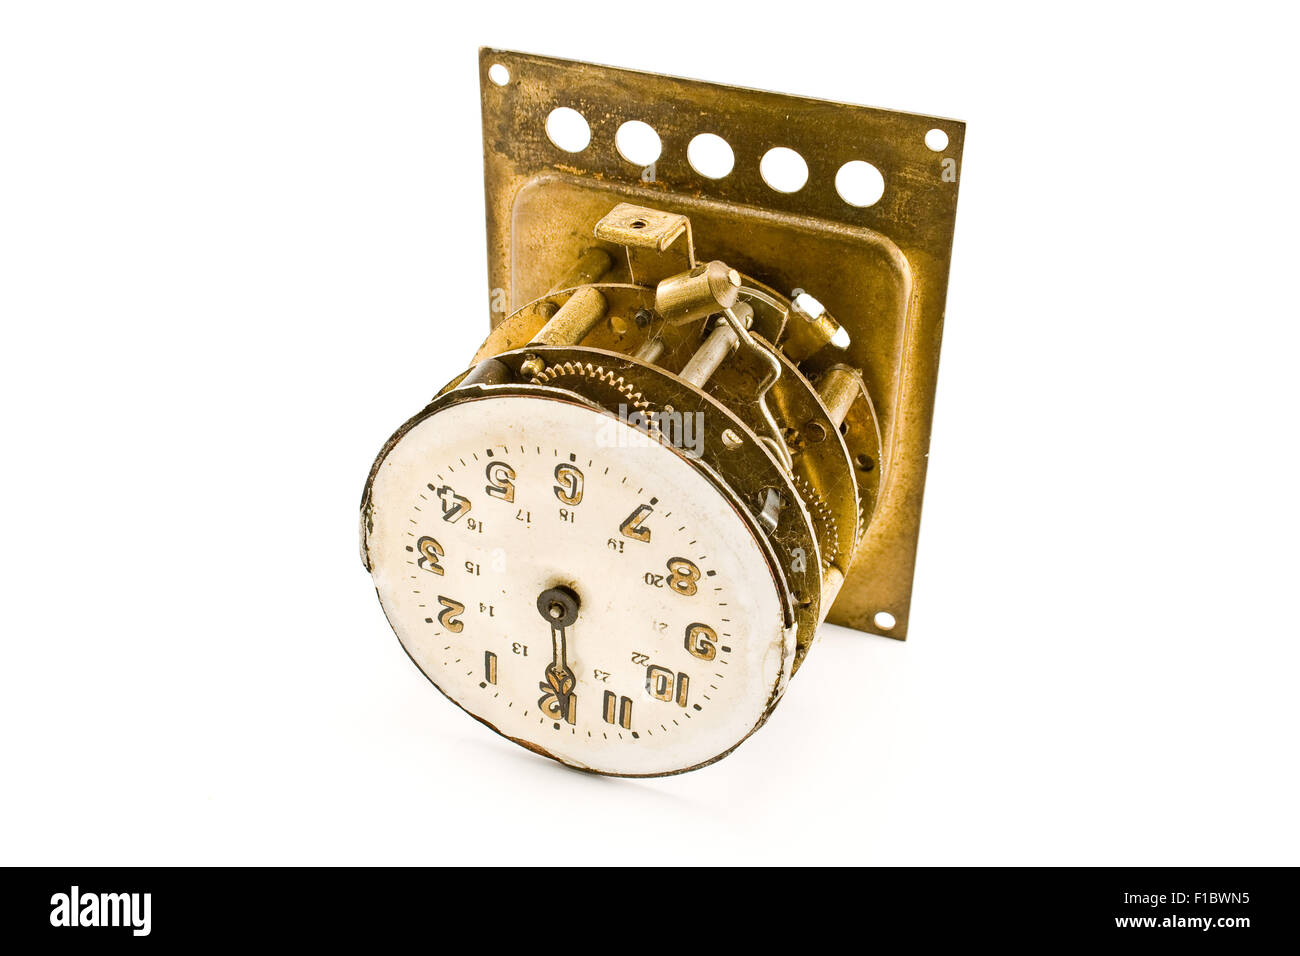 Inside of the antique vintage clock - mechanism - isolated on white Stock Photo